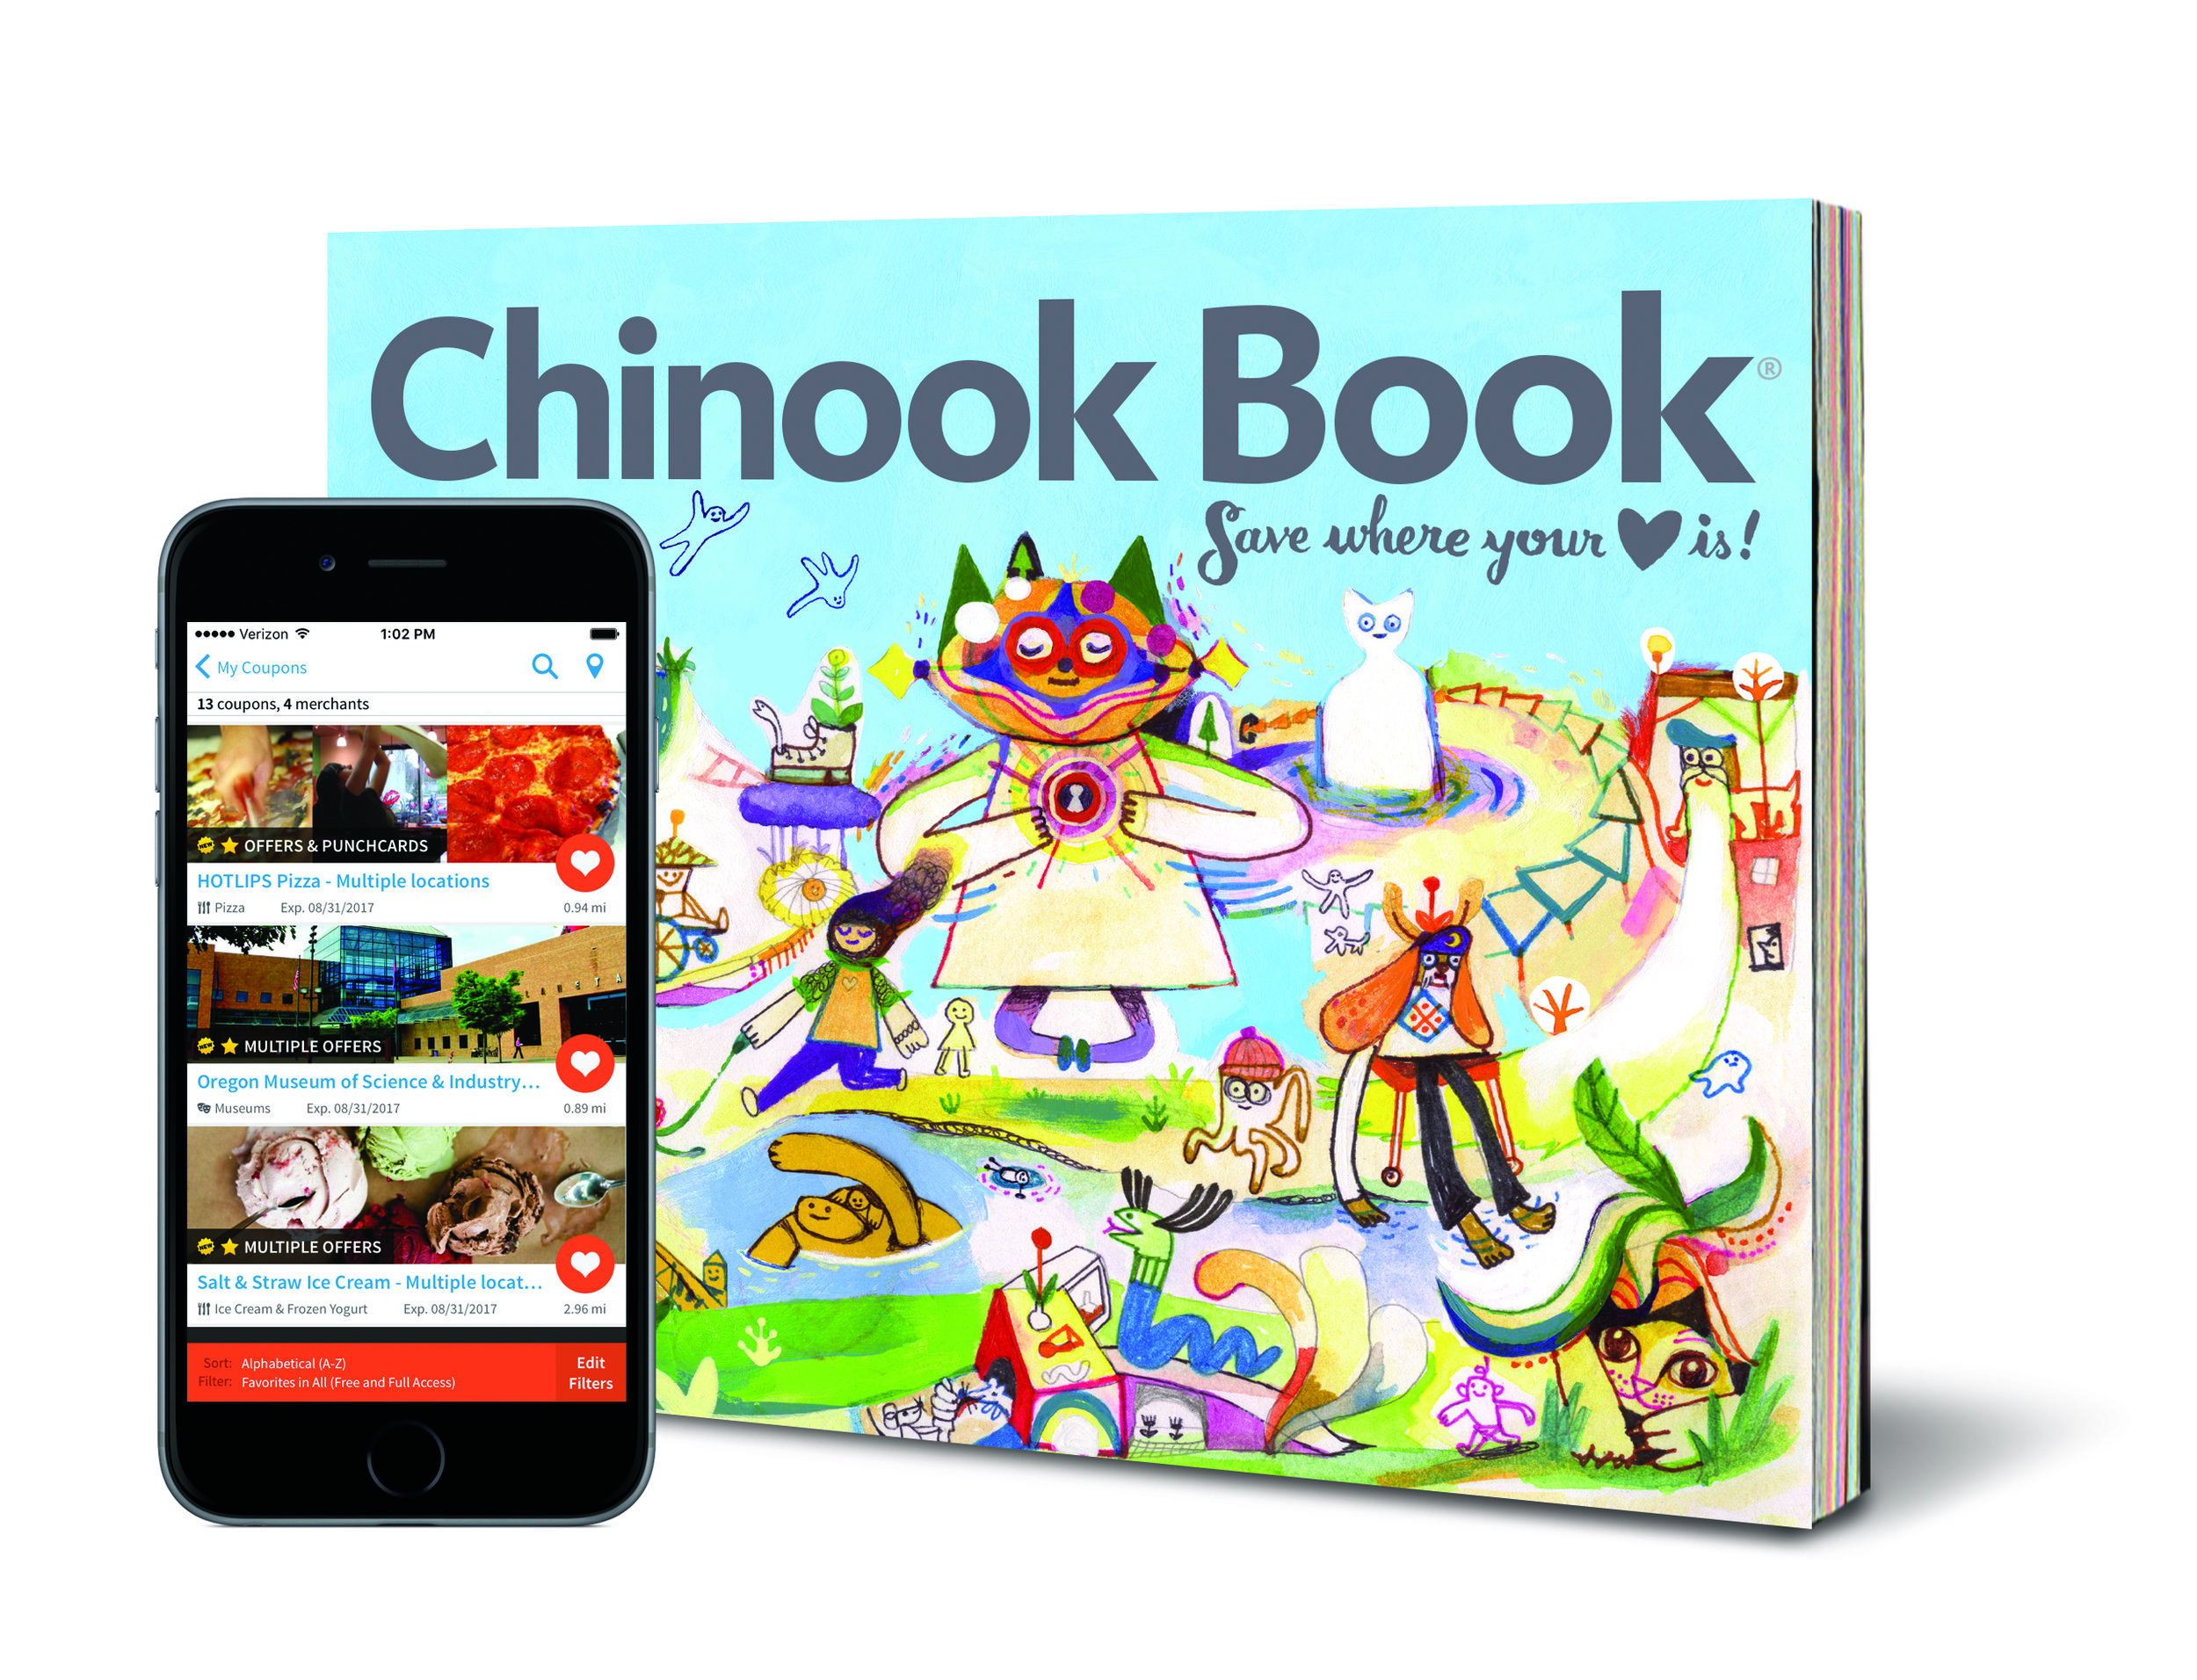 Let the new Chinook Book entertain you — Resourceful PDX